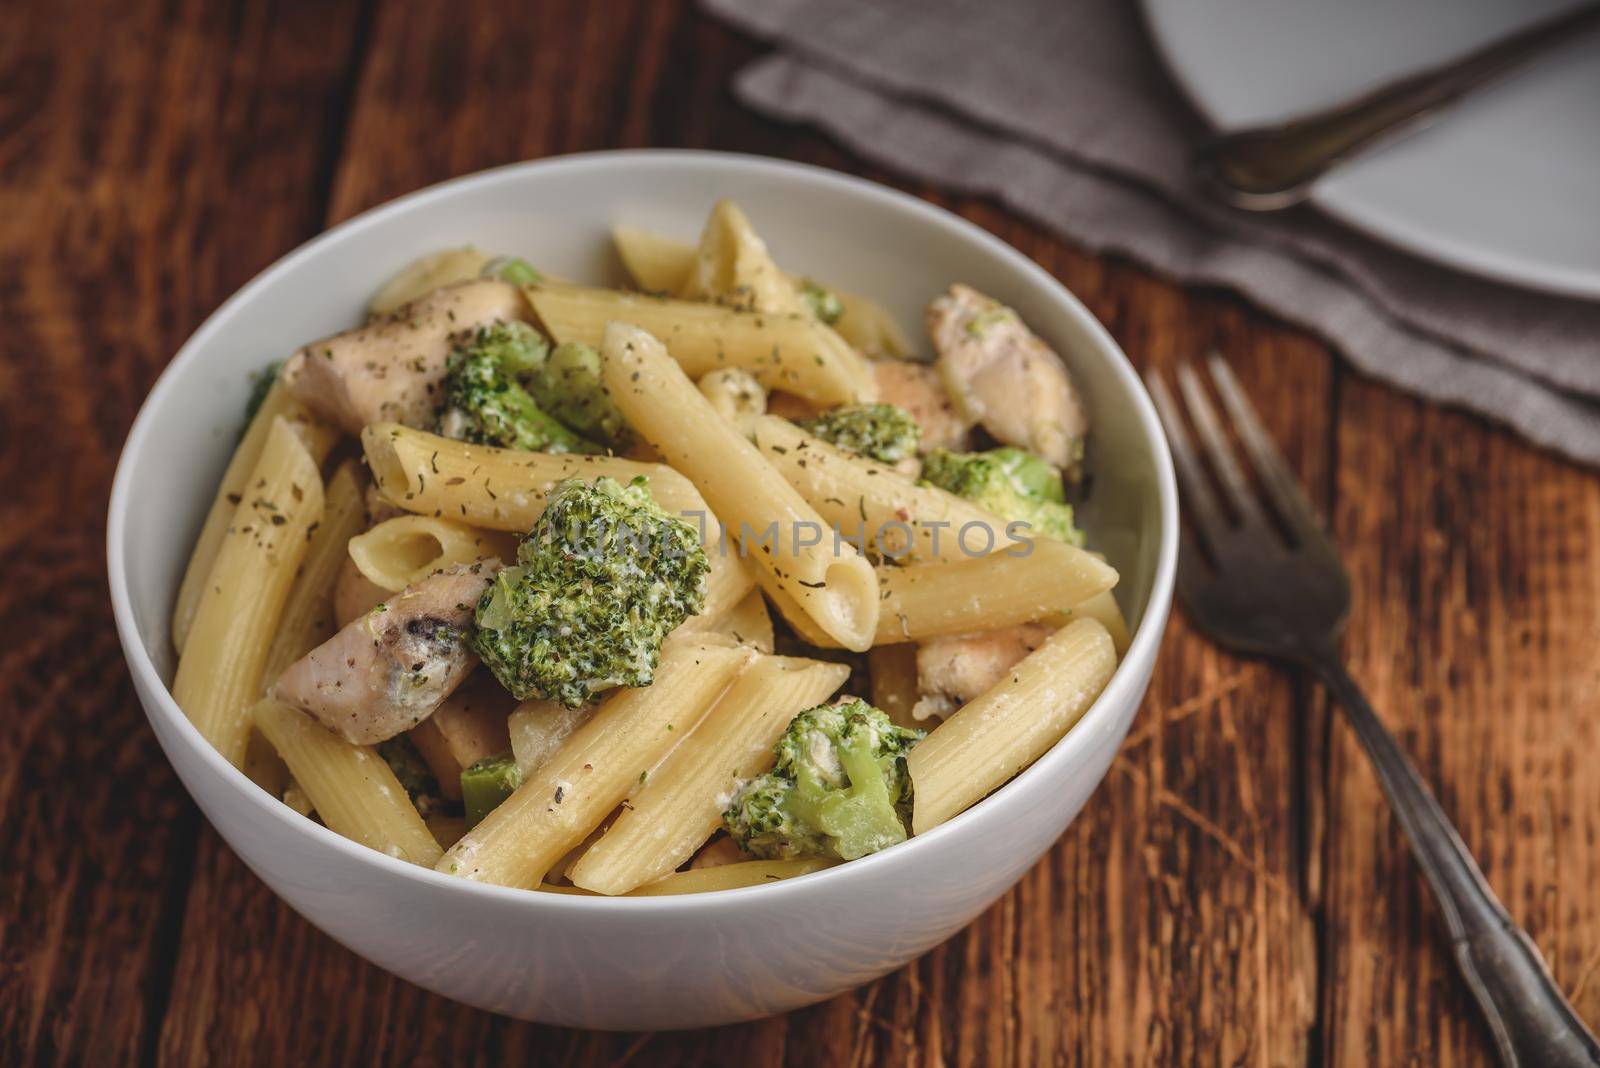 Pasta with chicken and broccoli by Seva_blsv